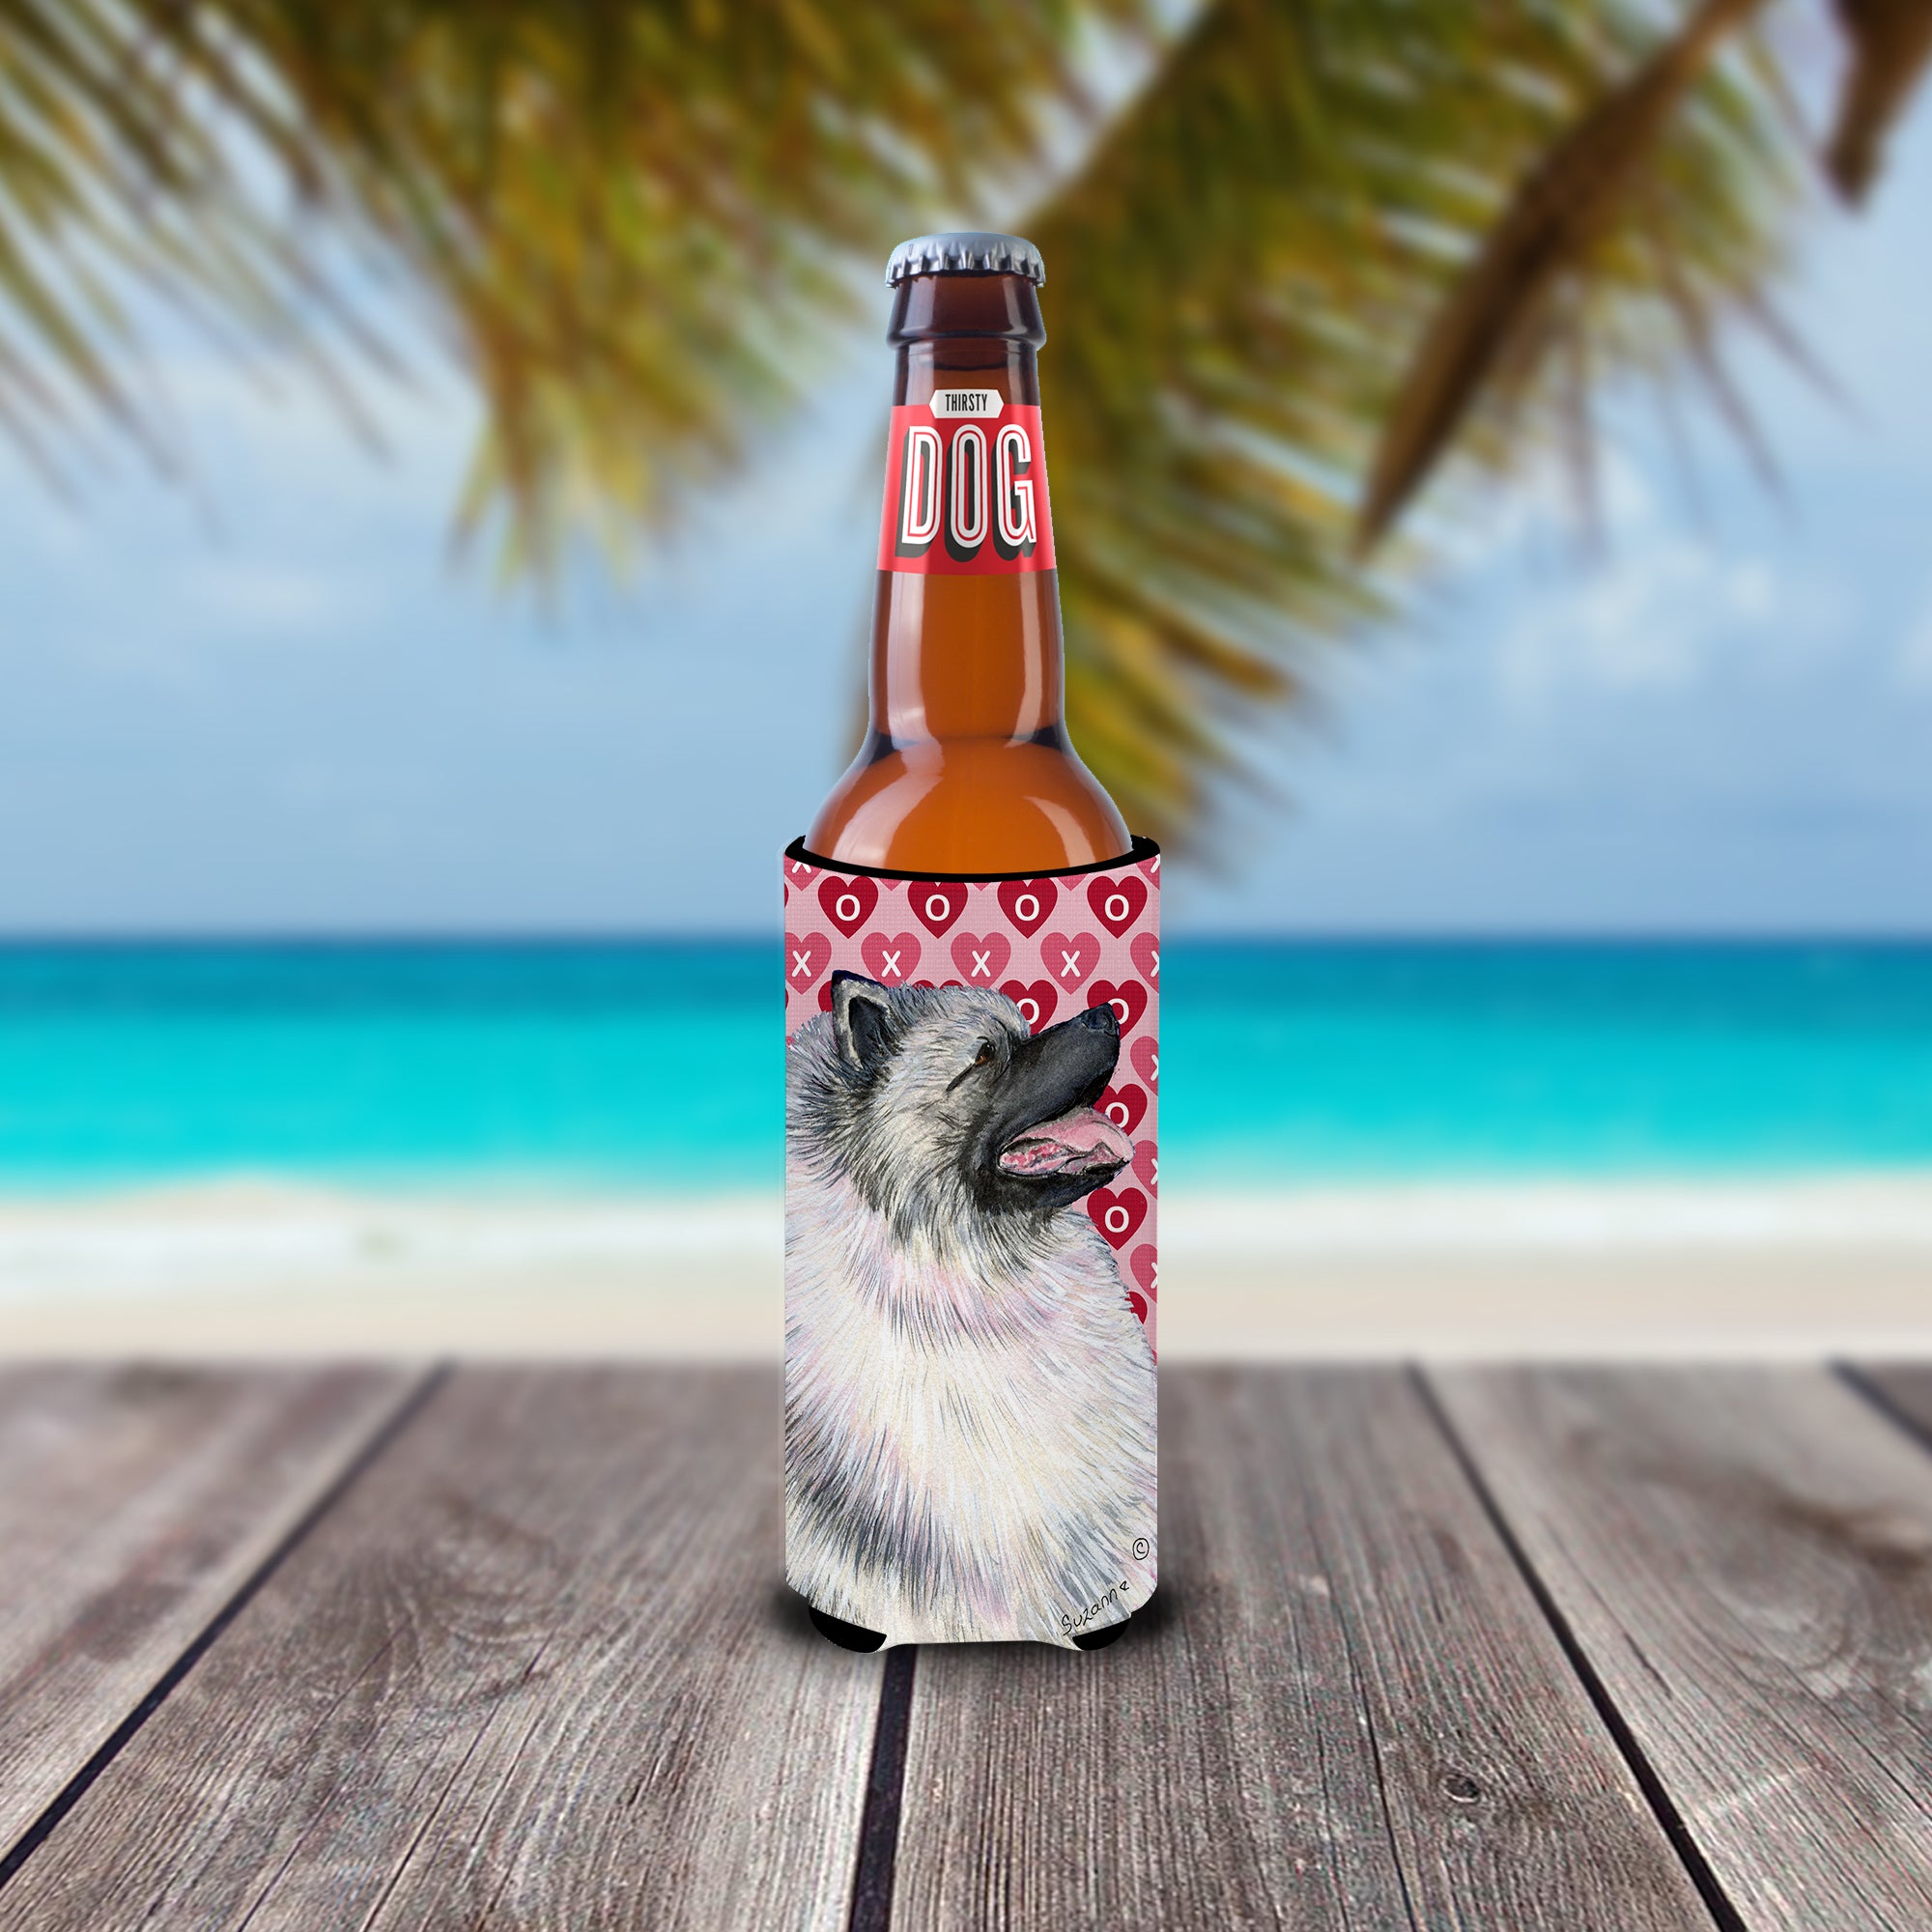 Keeshond Hearts Love and Valentine's Day Portrait Ultra Beverage Insulators for slim cans SS4488MUK.